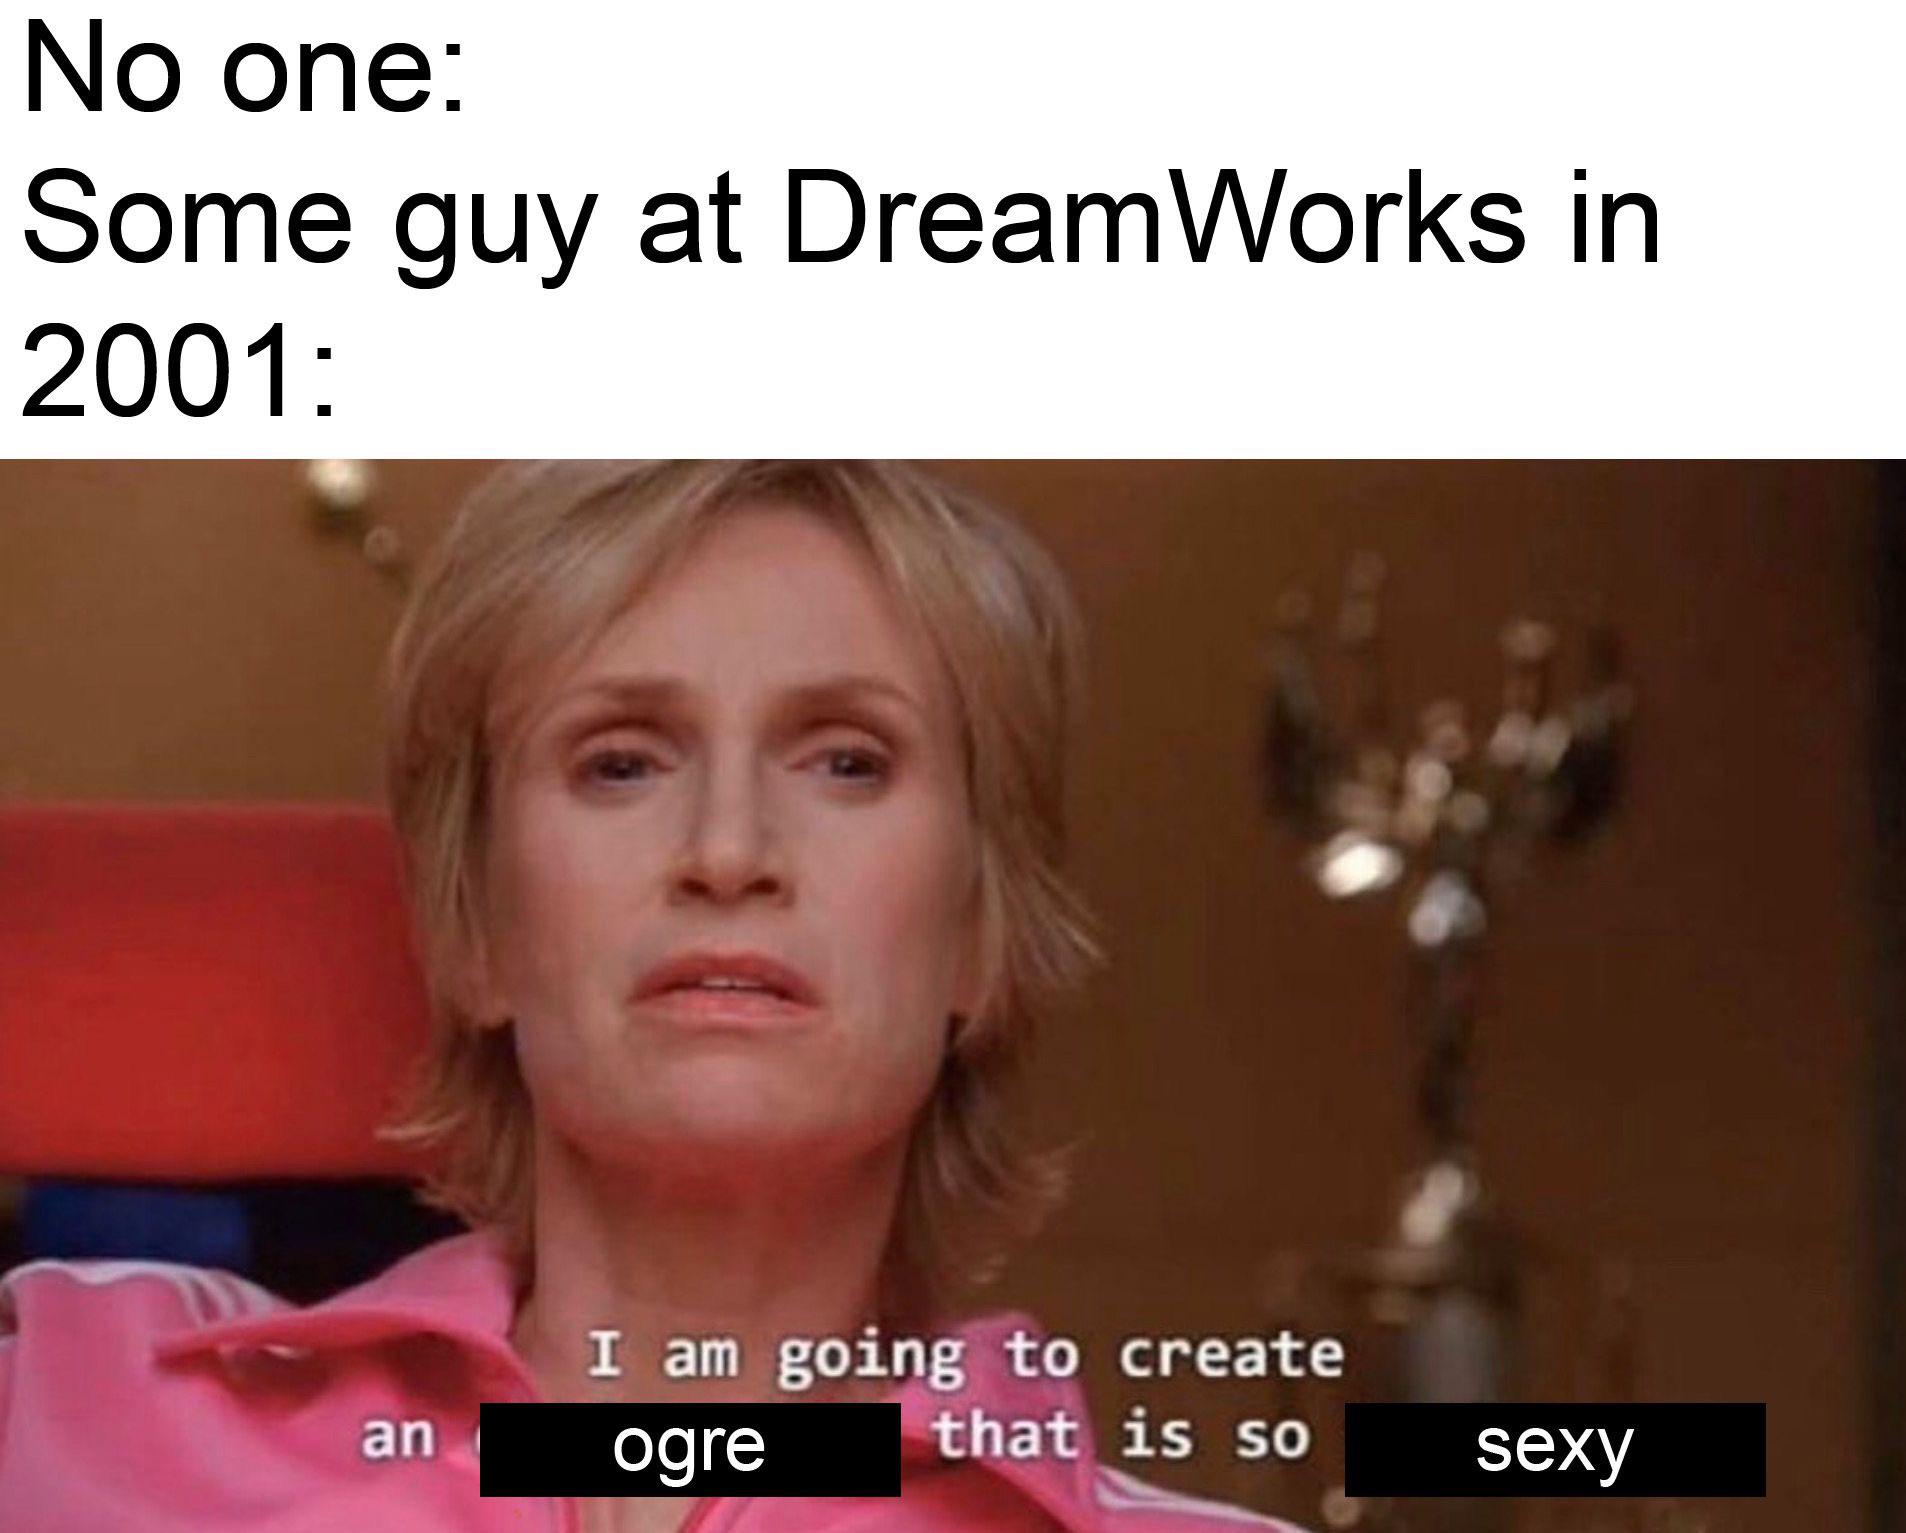 philosophical memes - No one Some guy at DreamWorks in 2001 an I am going to create ogre that is so sexy